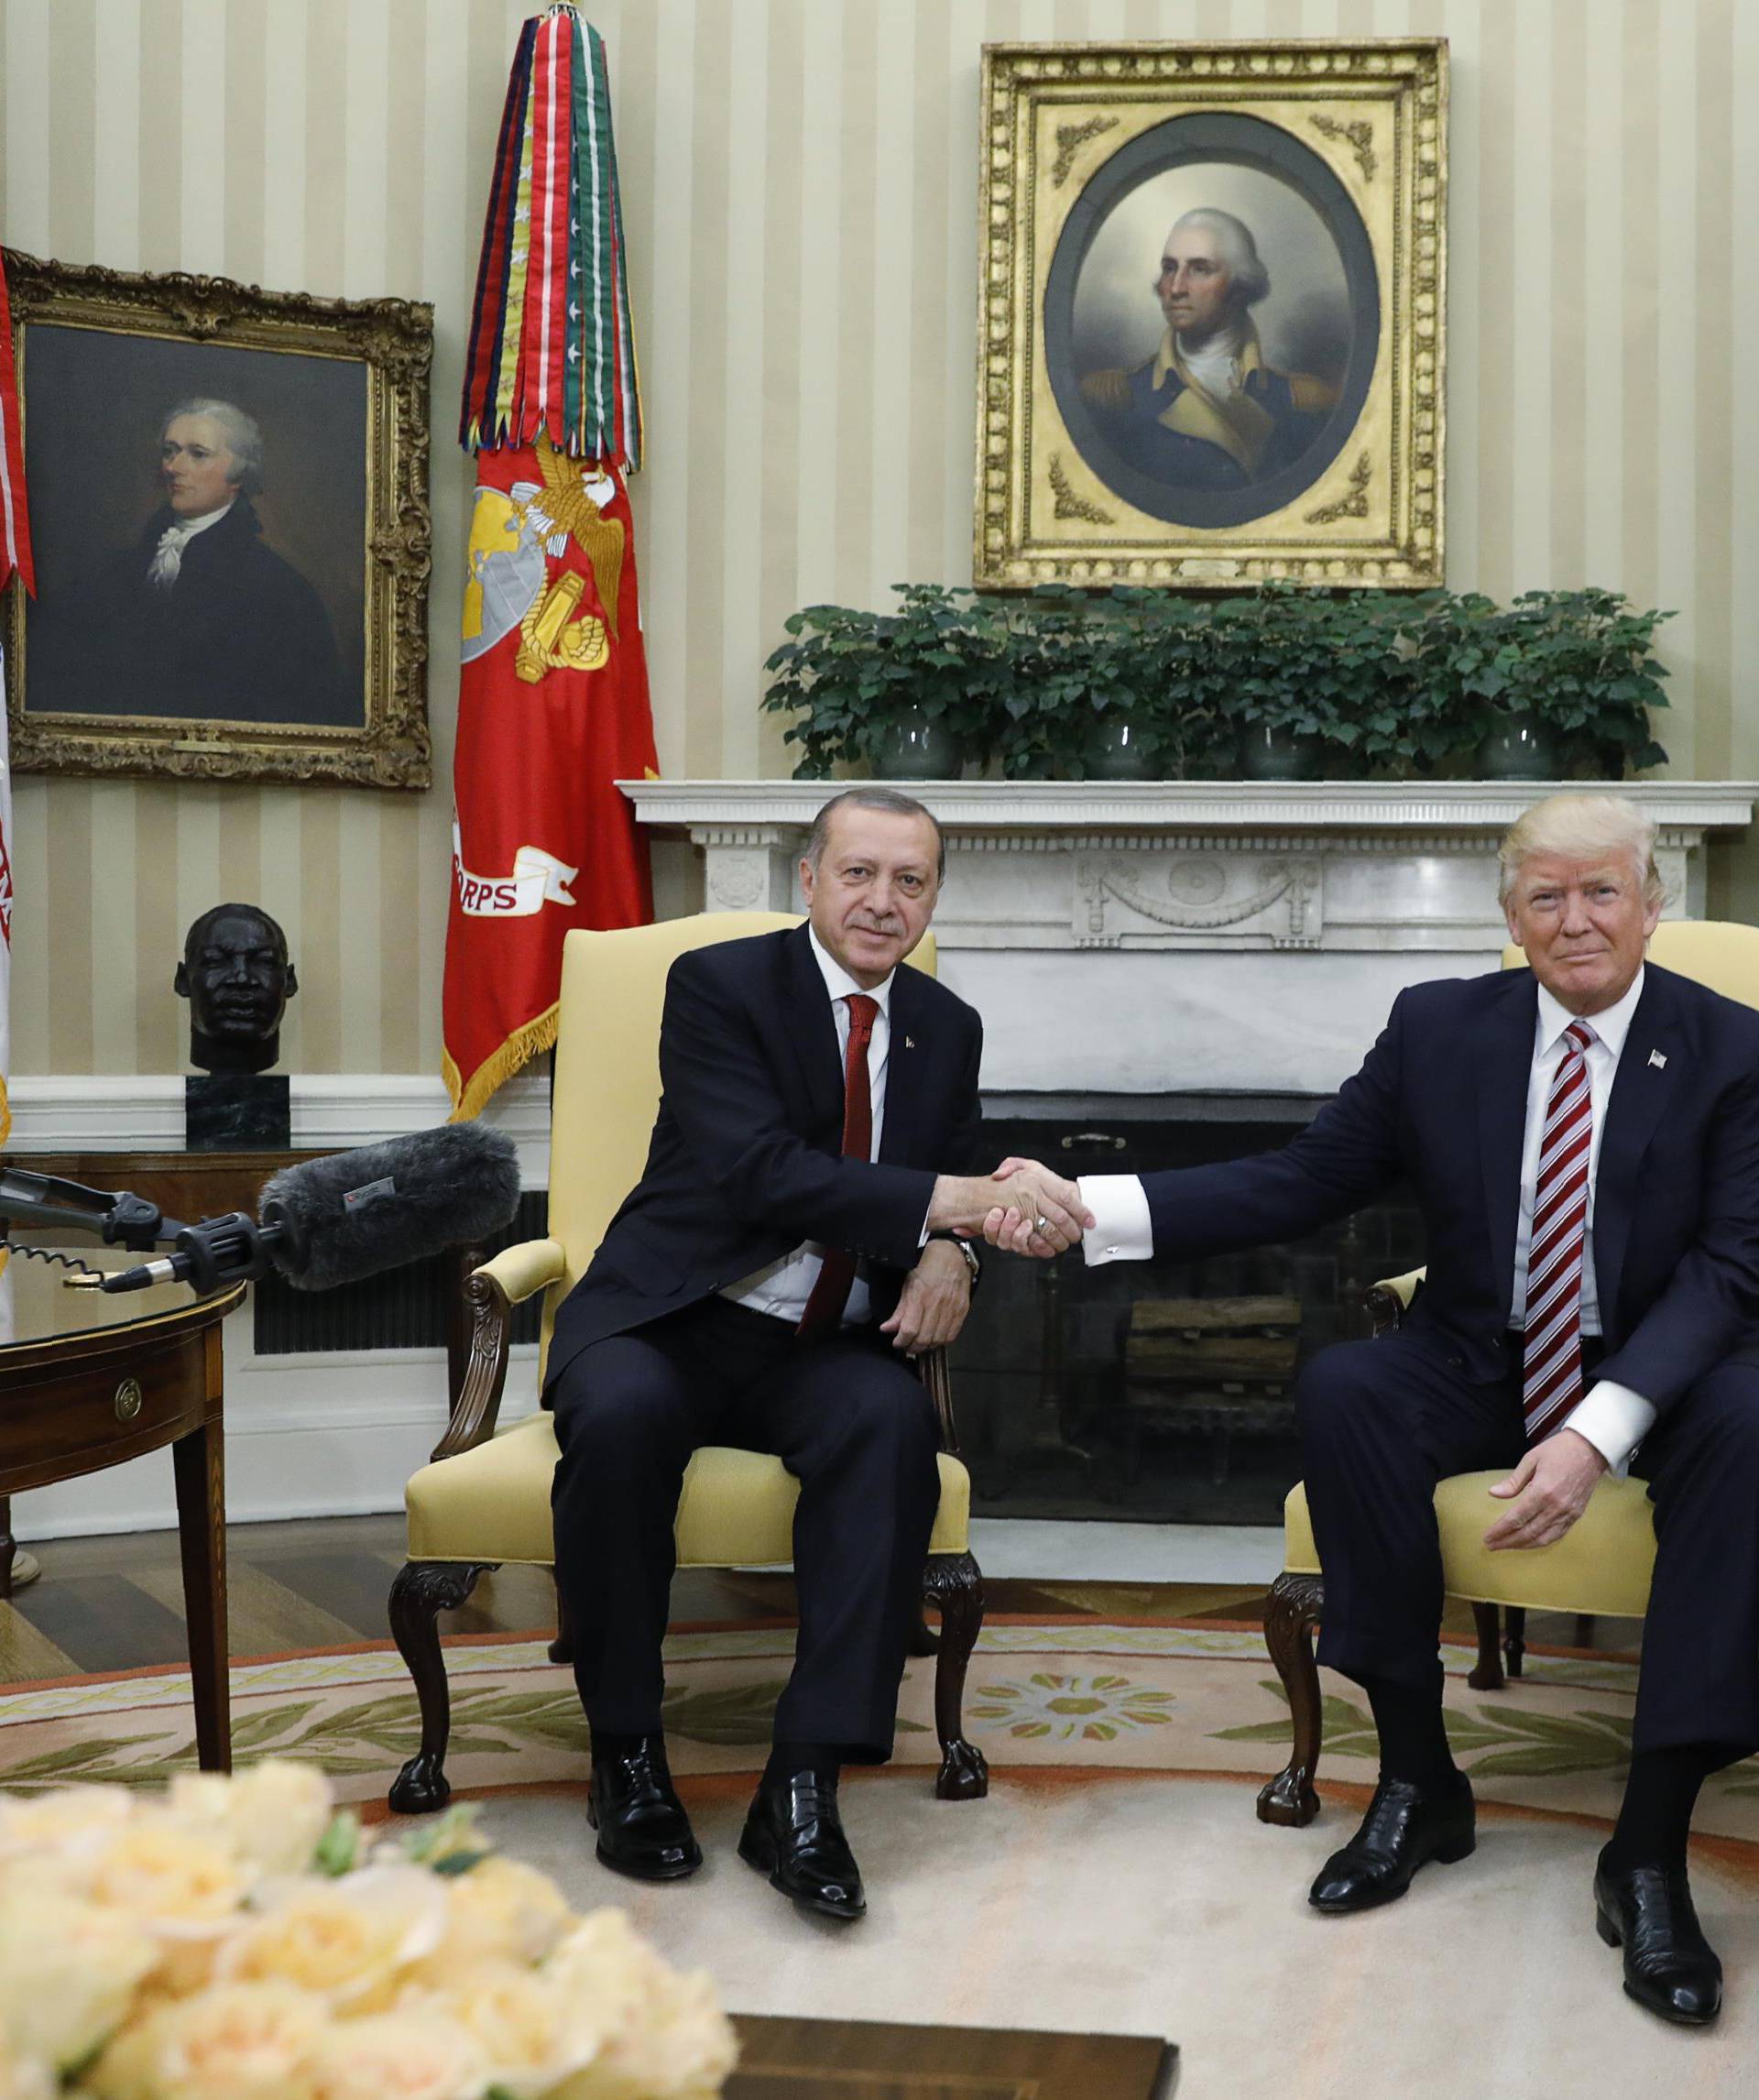 Turkey's President Erdogan shakes hands with U.S. President Trump in the Oval Office of the White House in Washington